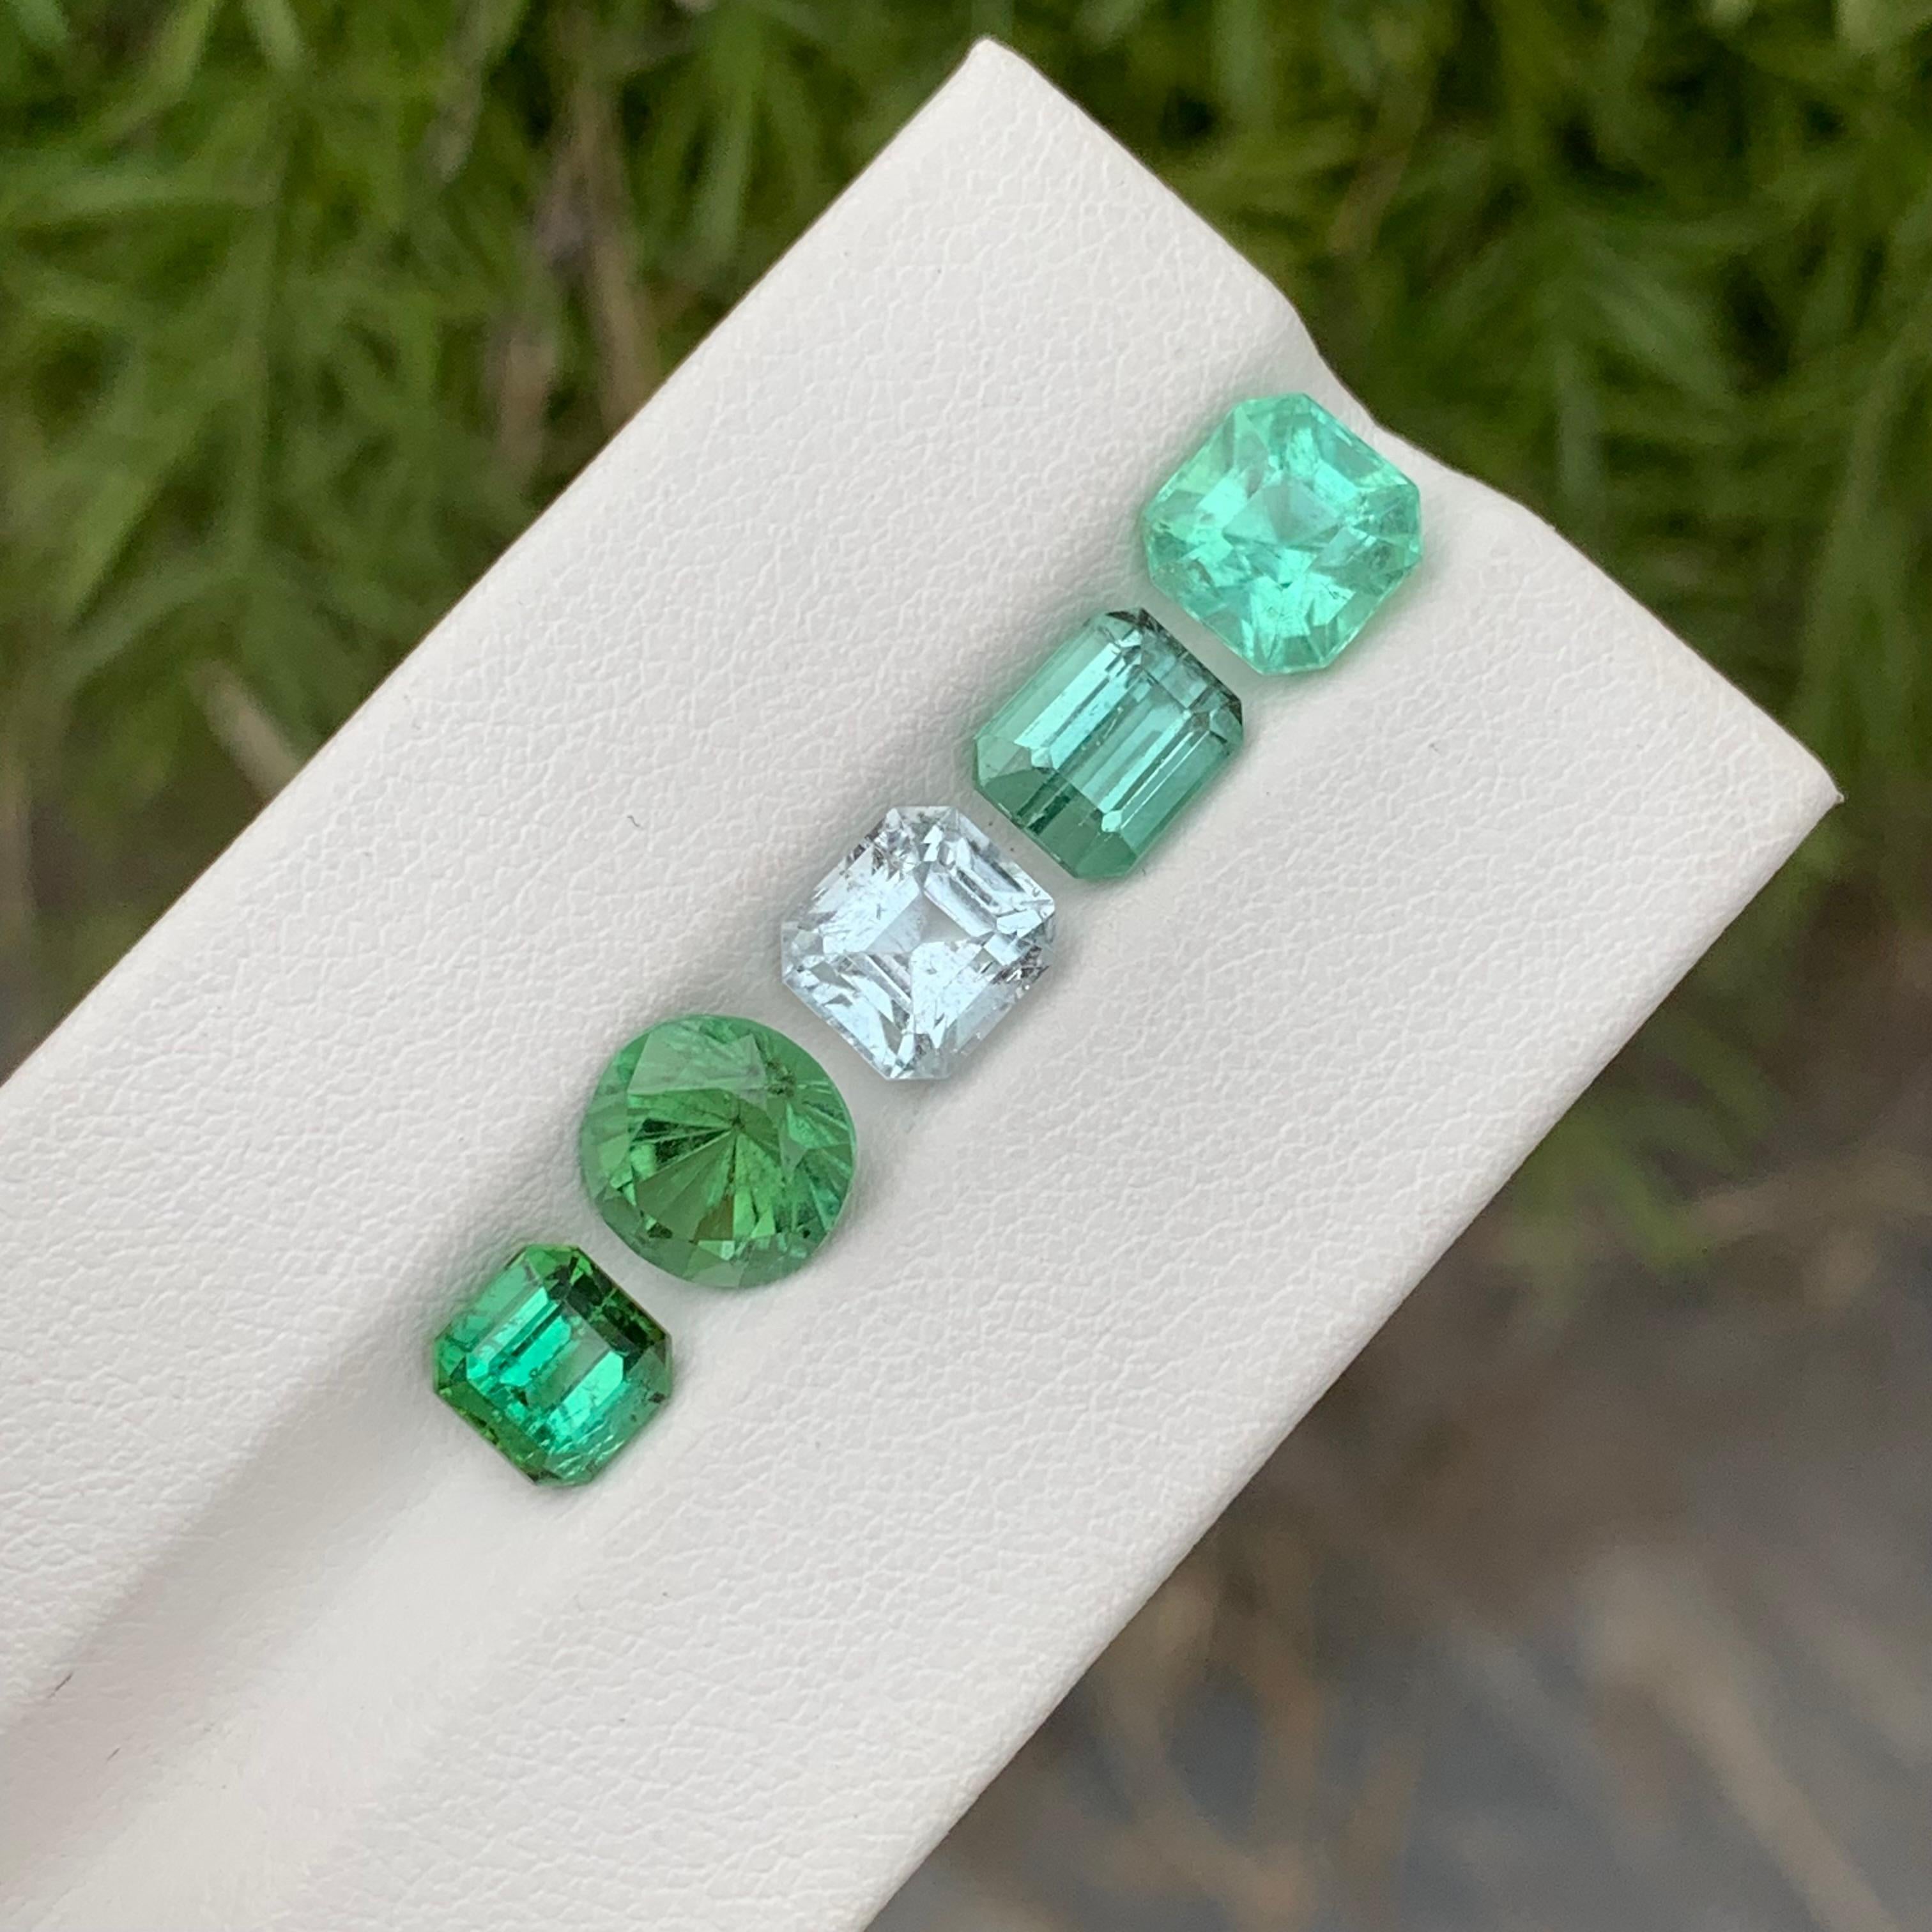 Loose Tourmaline Lot 
Weight: 9.60 Carats
Sizes: 1.25 to 2.20 Carat 
Colour: Mint Green And White 
Origin: Afghanistan
Certificate: On Demand
Treatment: Non

Tourmaline is a captivating gemstone known for its remarkable variety of colors, making it